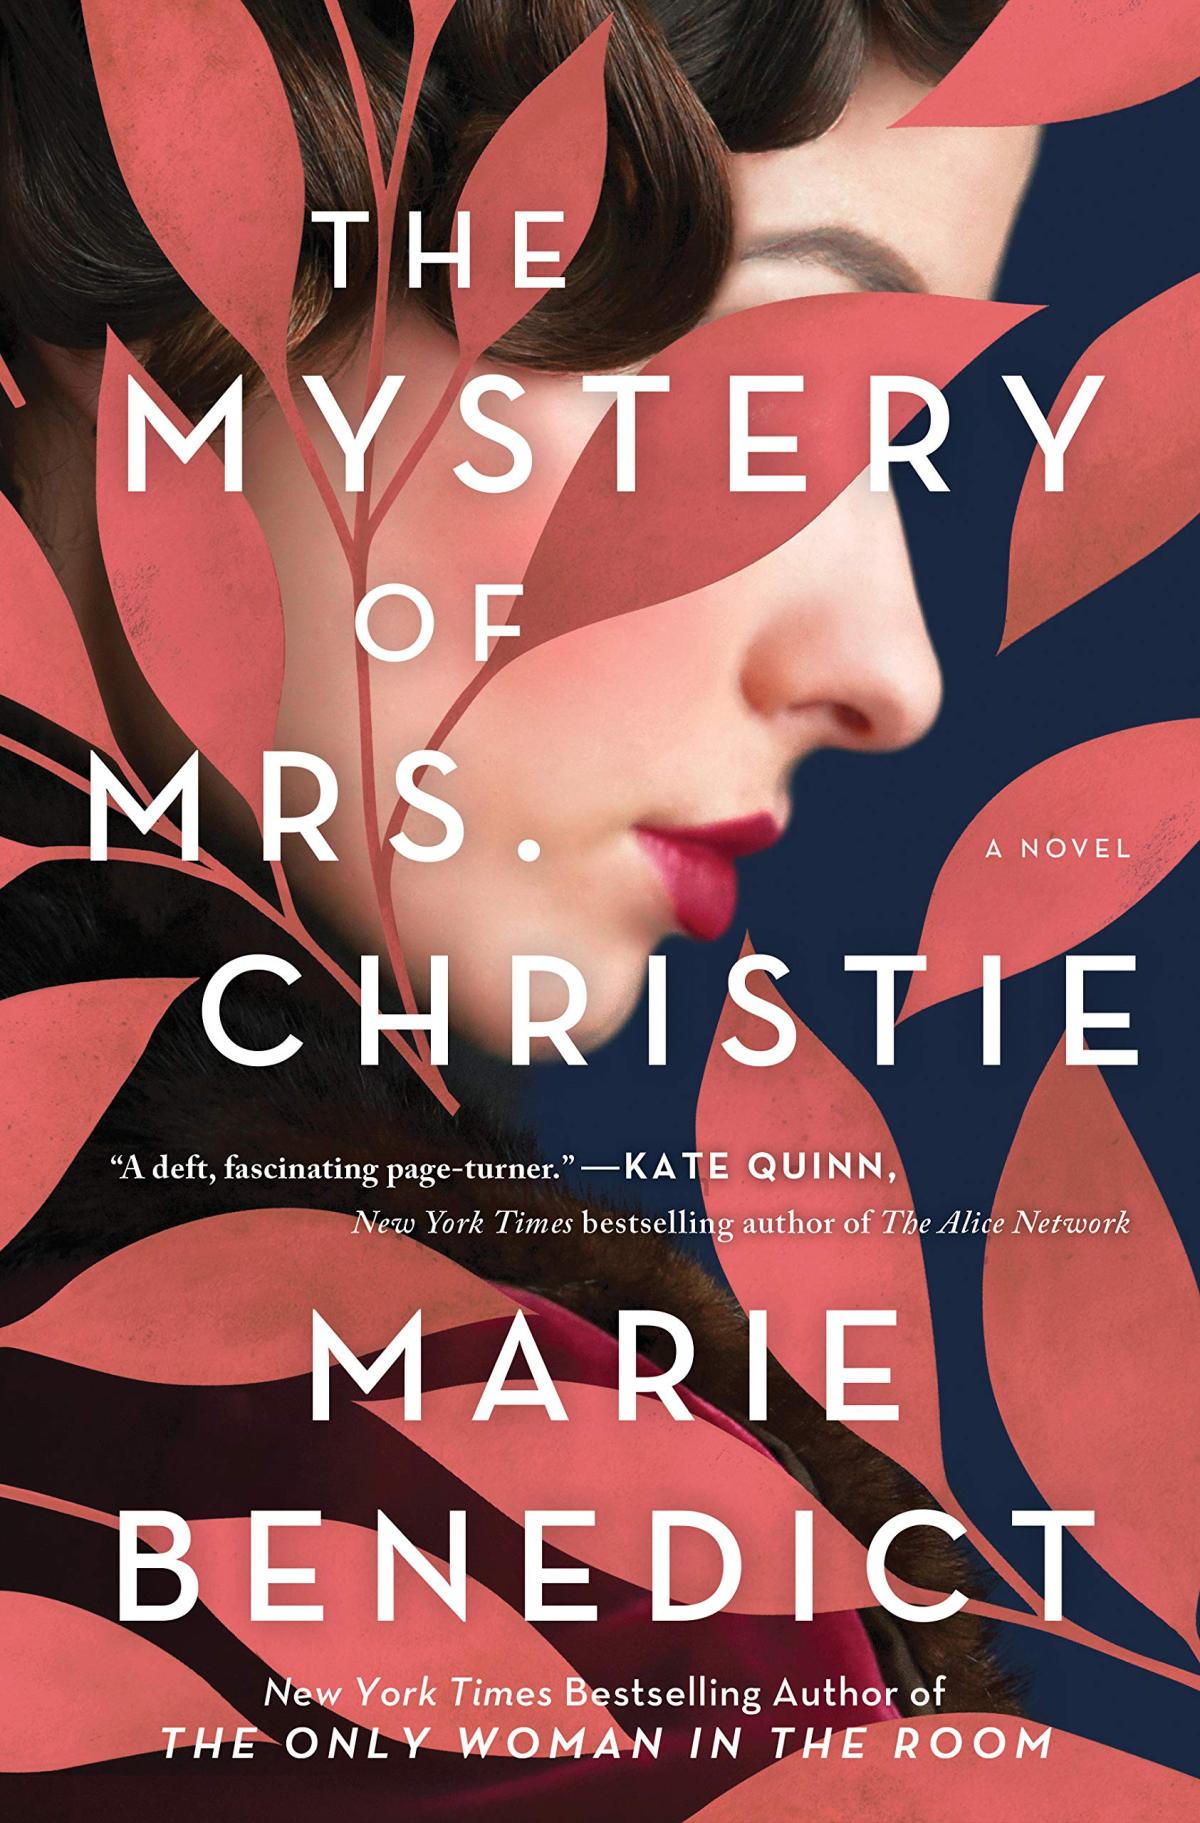 The Mystery of Mrs. Christie book cover